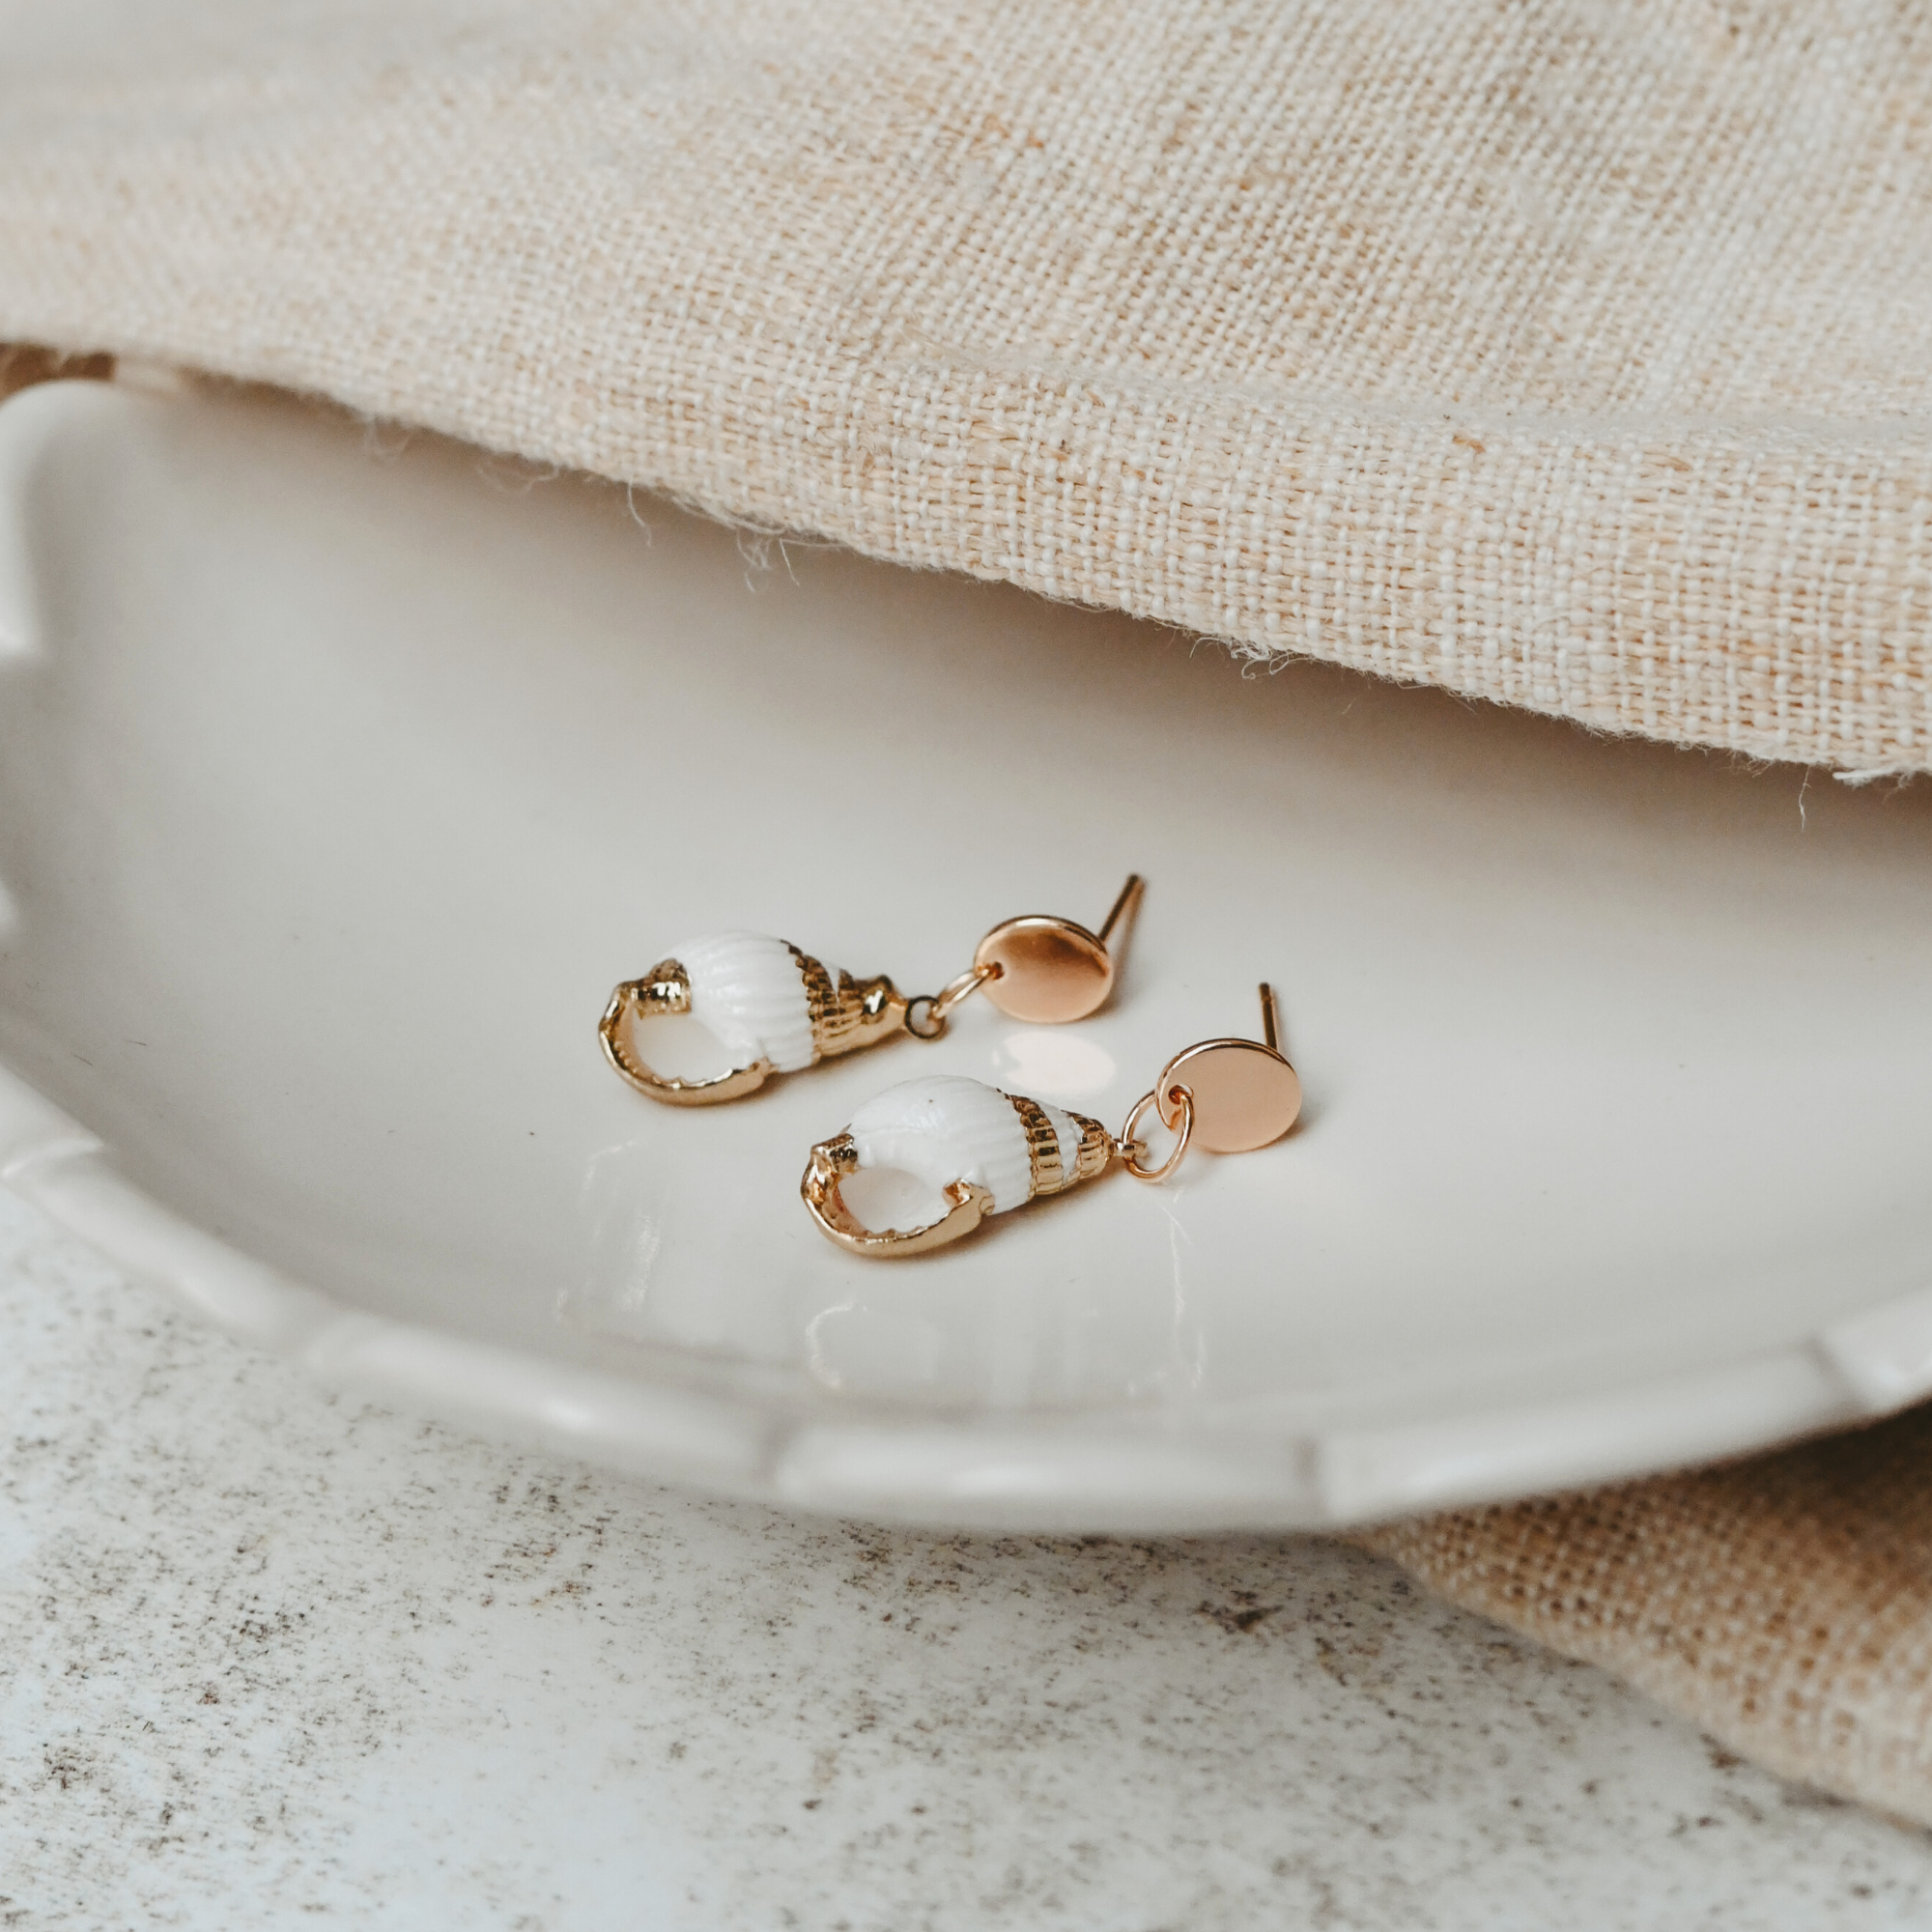 Cosmos Studio by Botanique Workshop natural and golden shell earrings